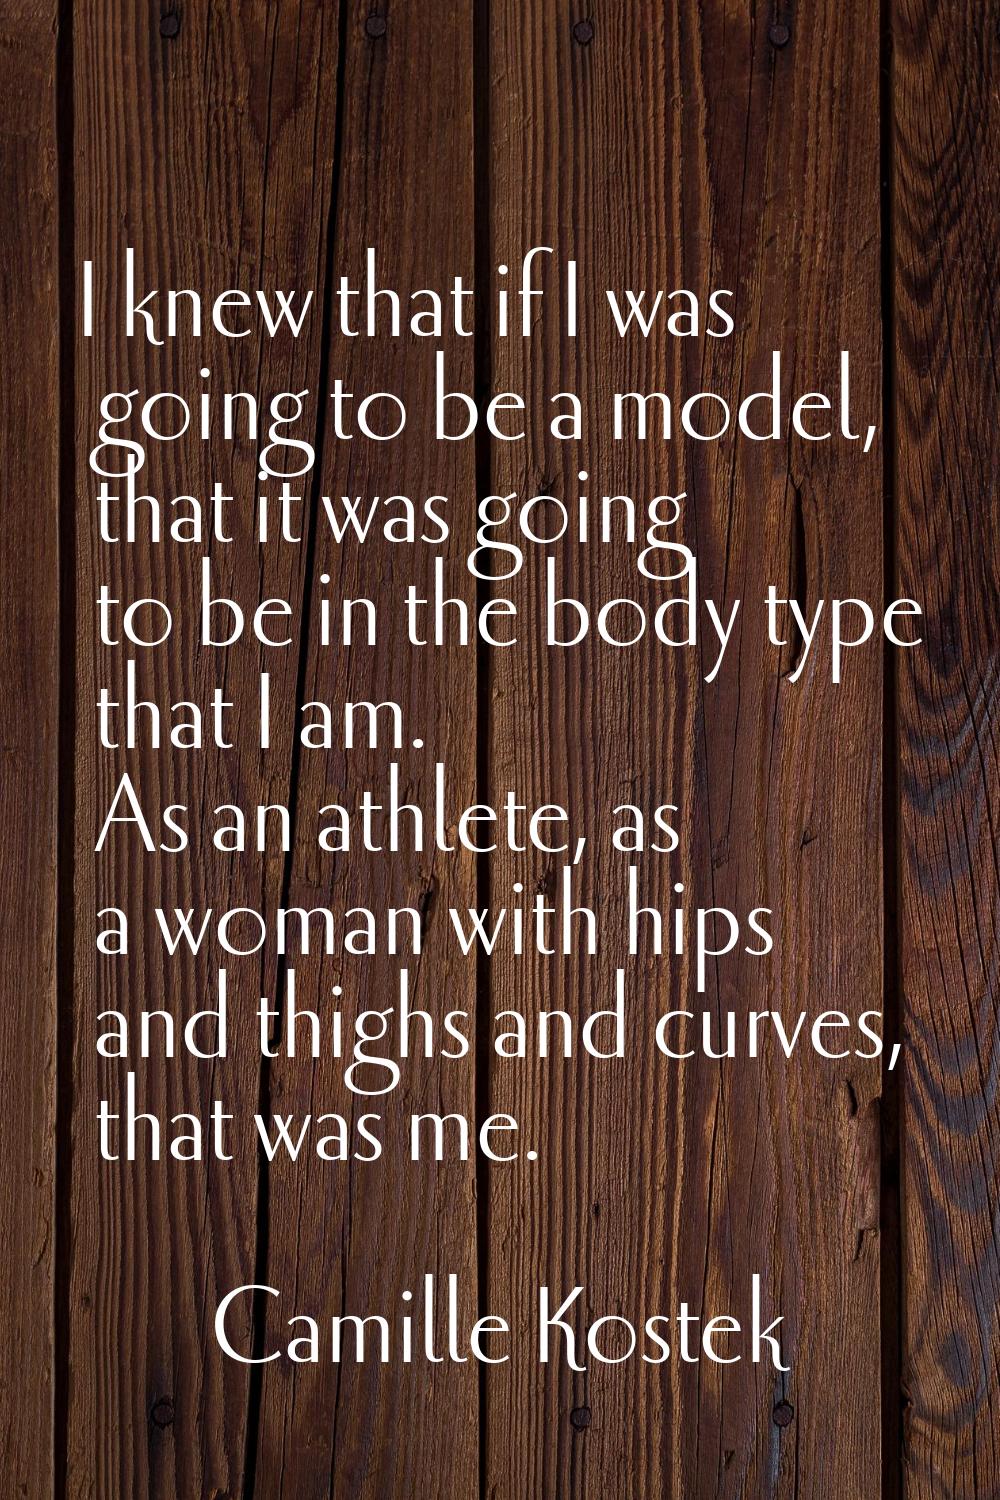 I knew that if I was going to be a model, that it was going to be in the body type that I am. As an